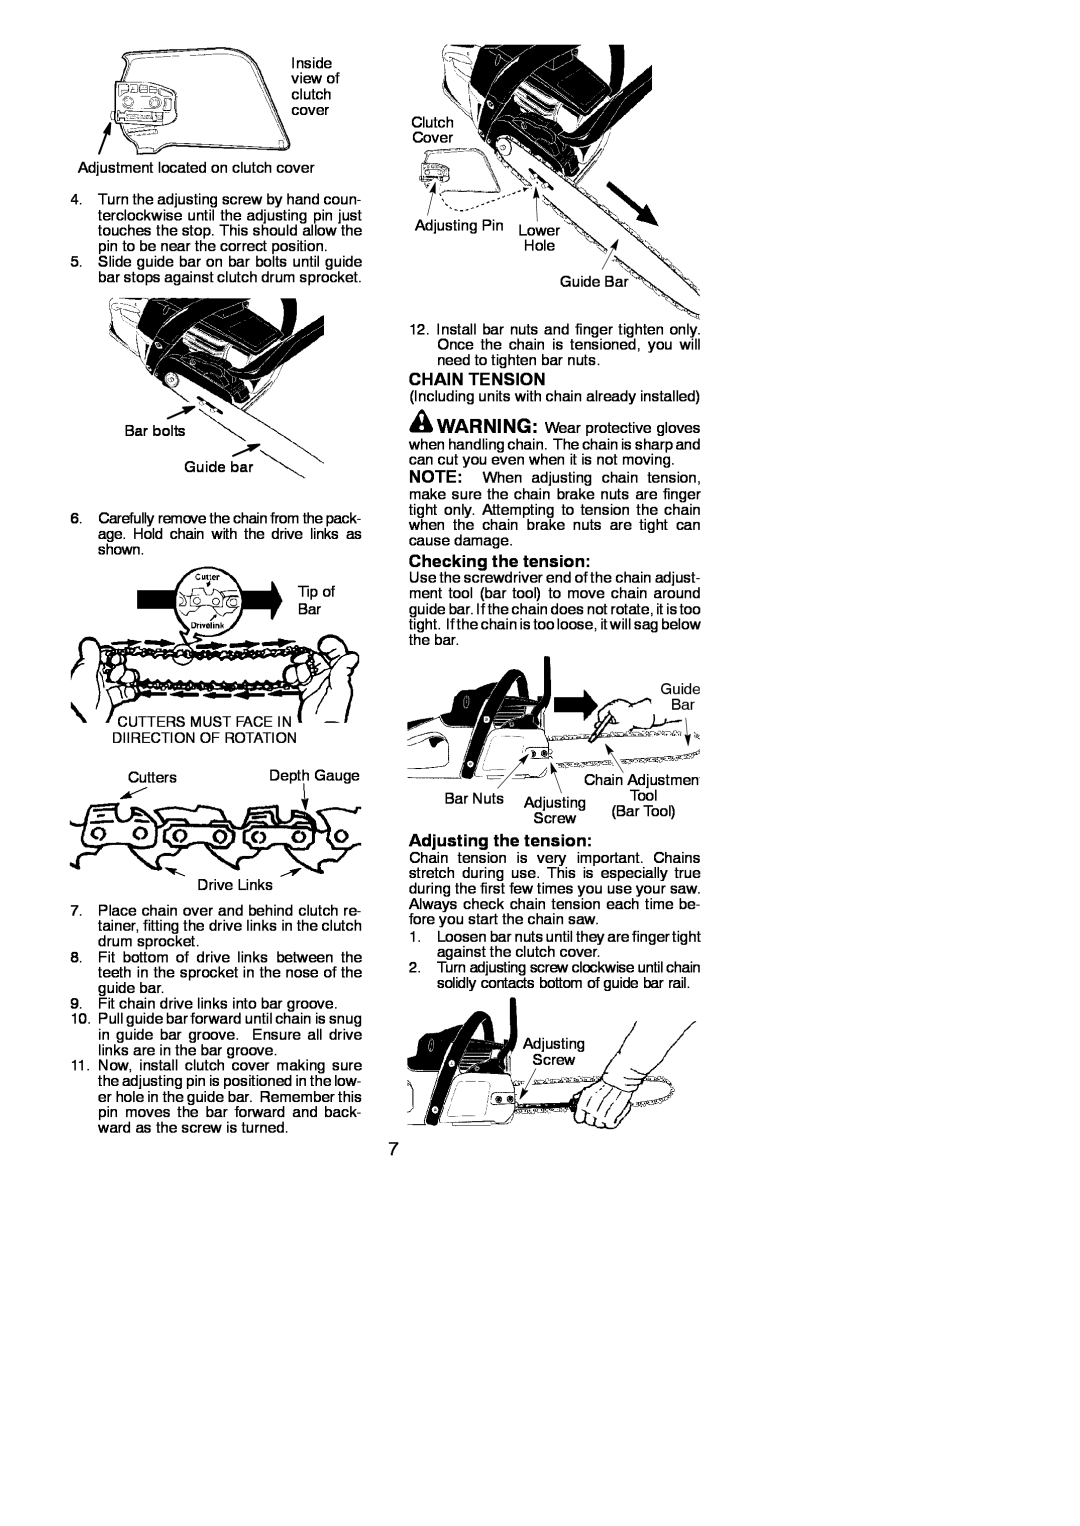 Poulan 966063101 instruction manual Chain Tension, Checking the tension, Adjusting the tension 